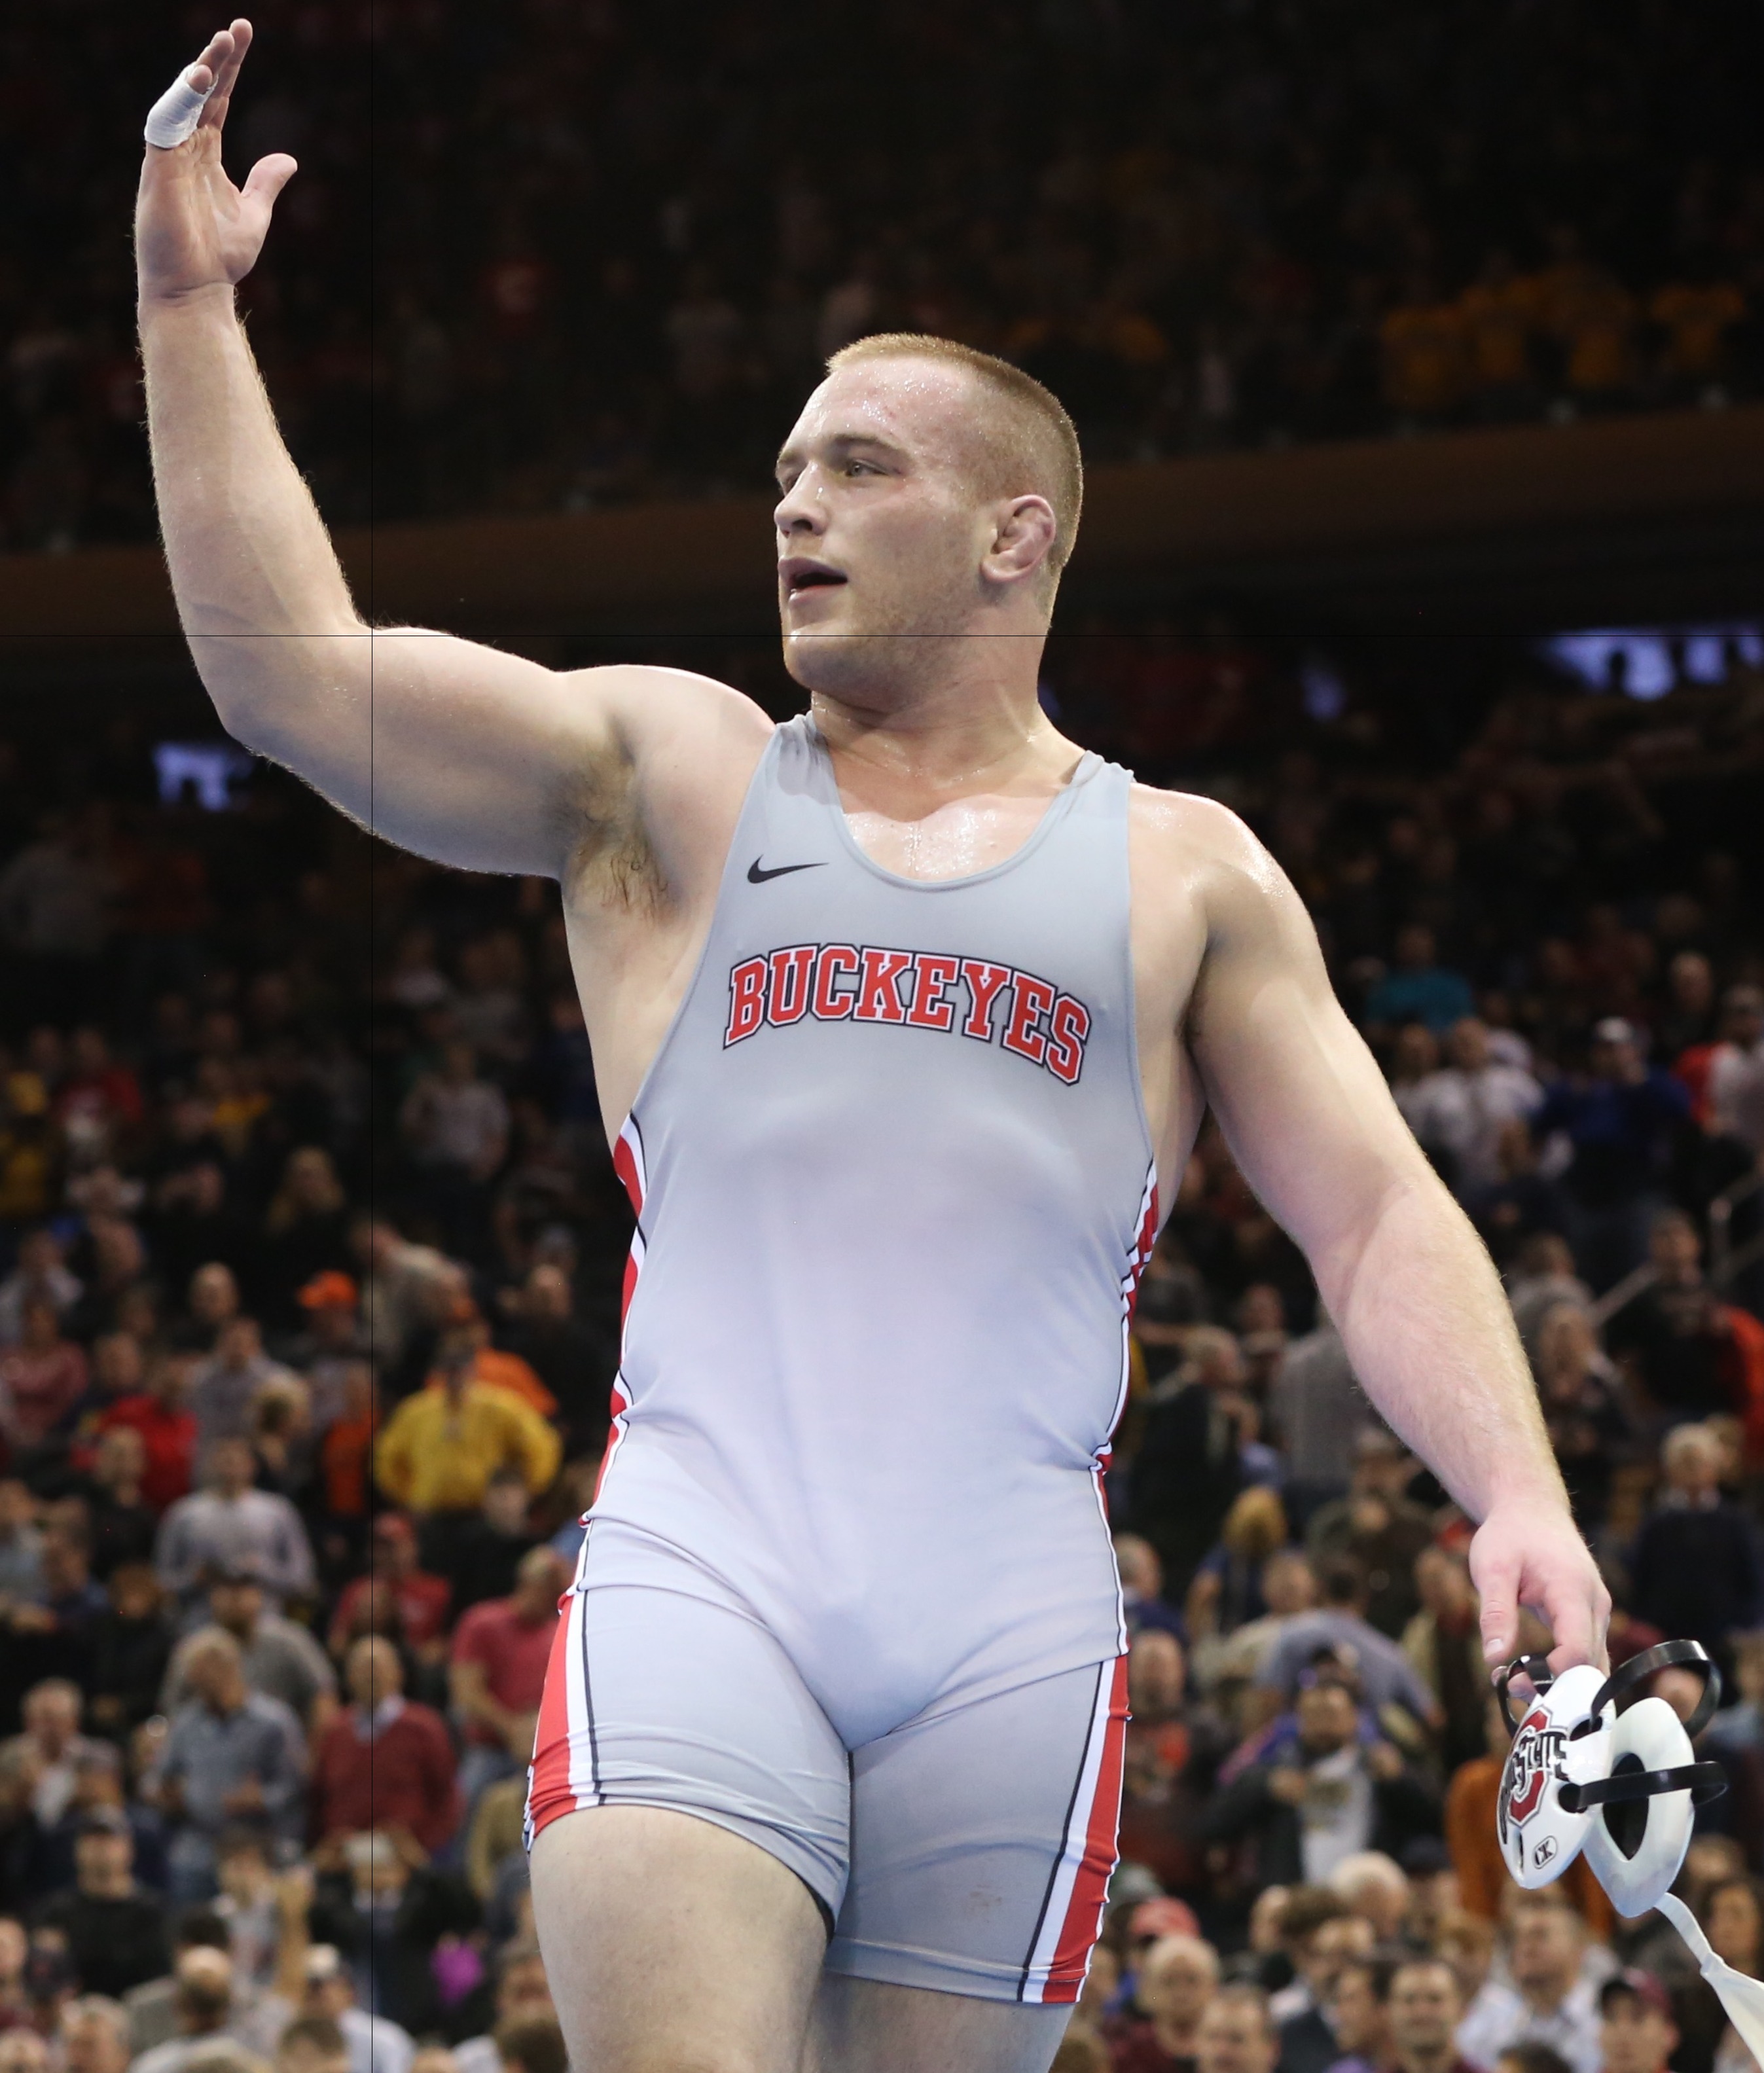 Magnanimous Kyle Snyder